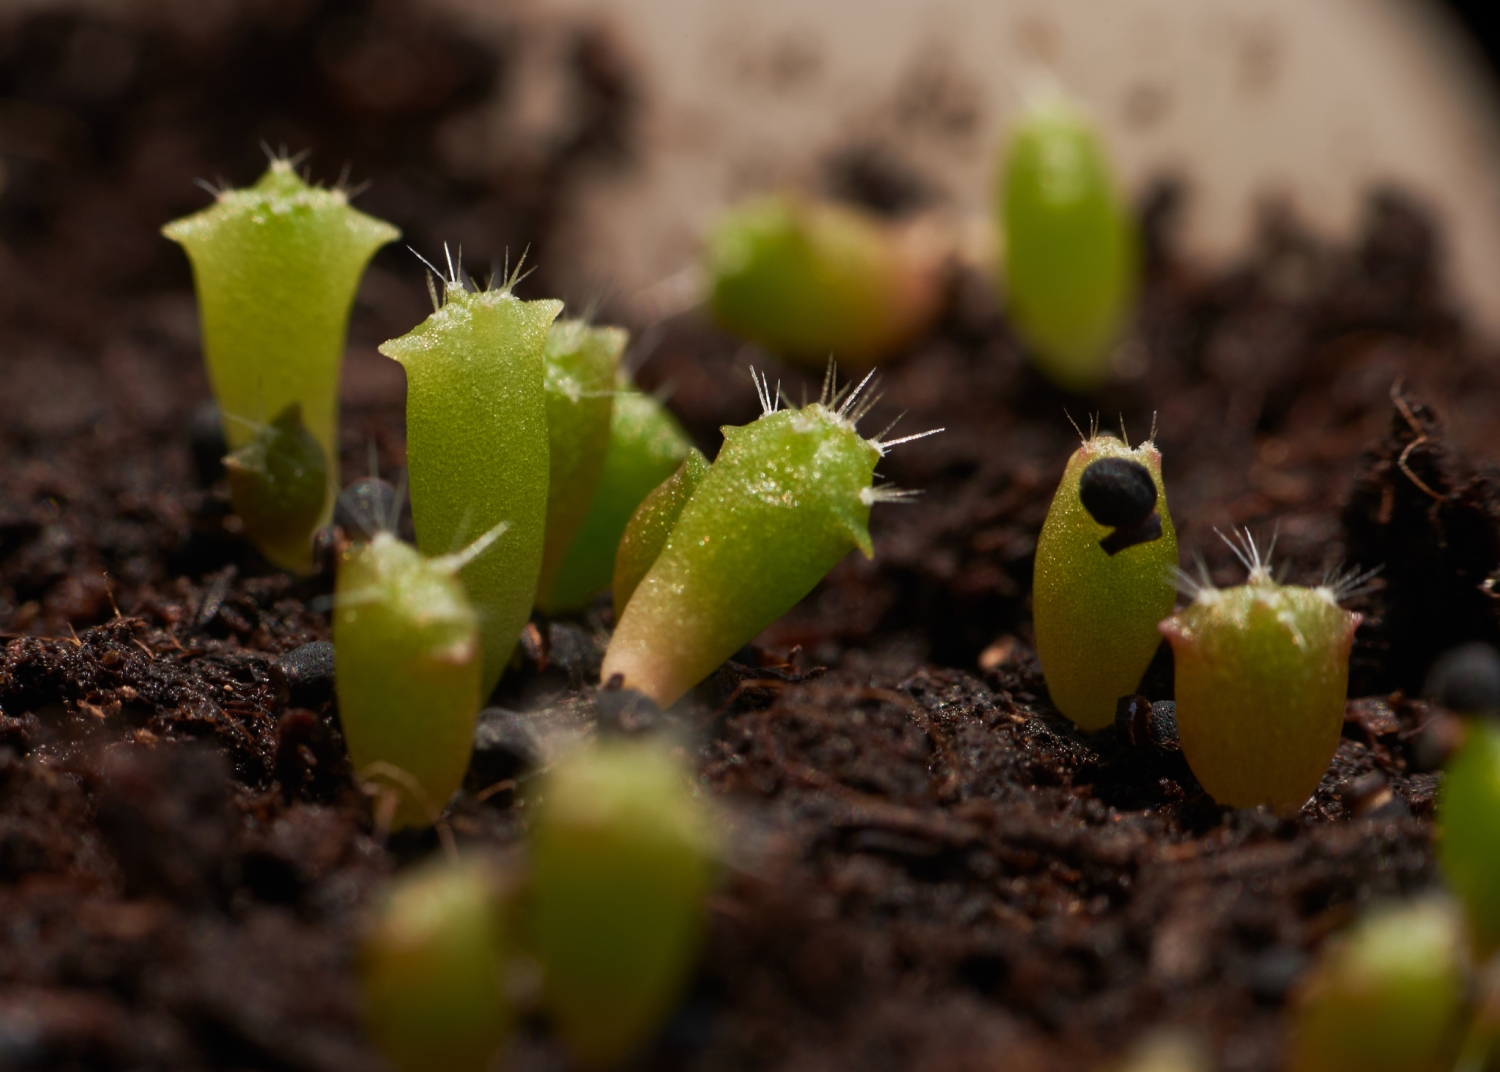 How to Propagate a Cactus From Cuttings, Offsets, or Seeds